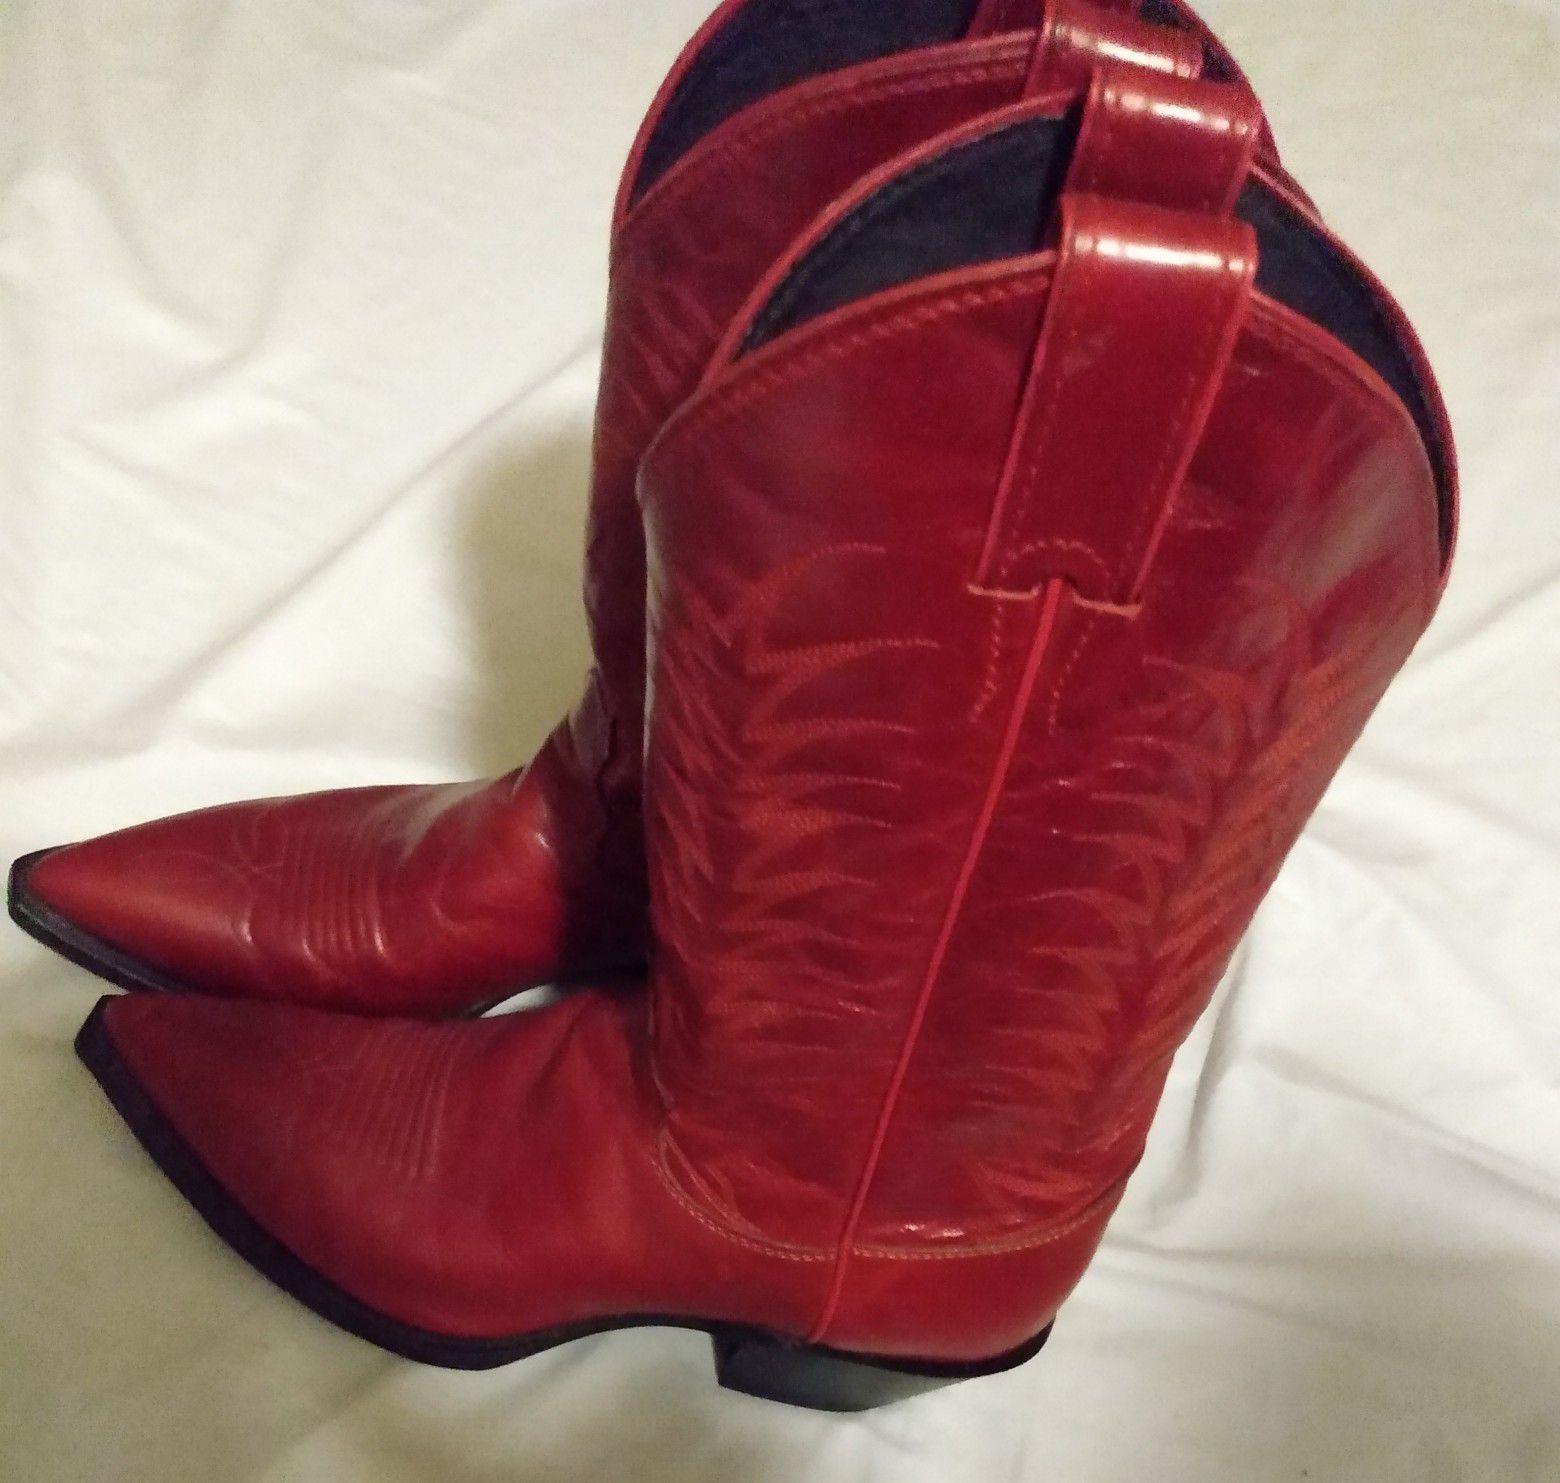 Justin Boots Size 8 1/2